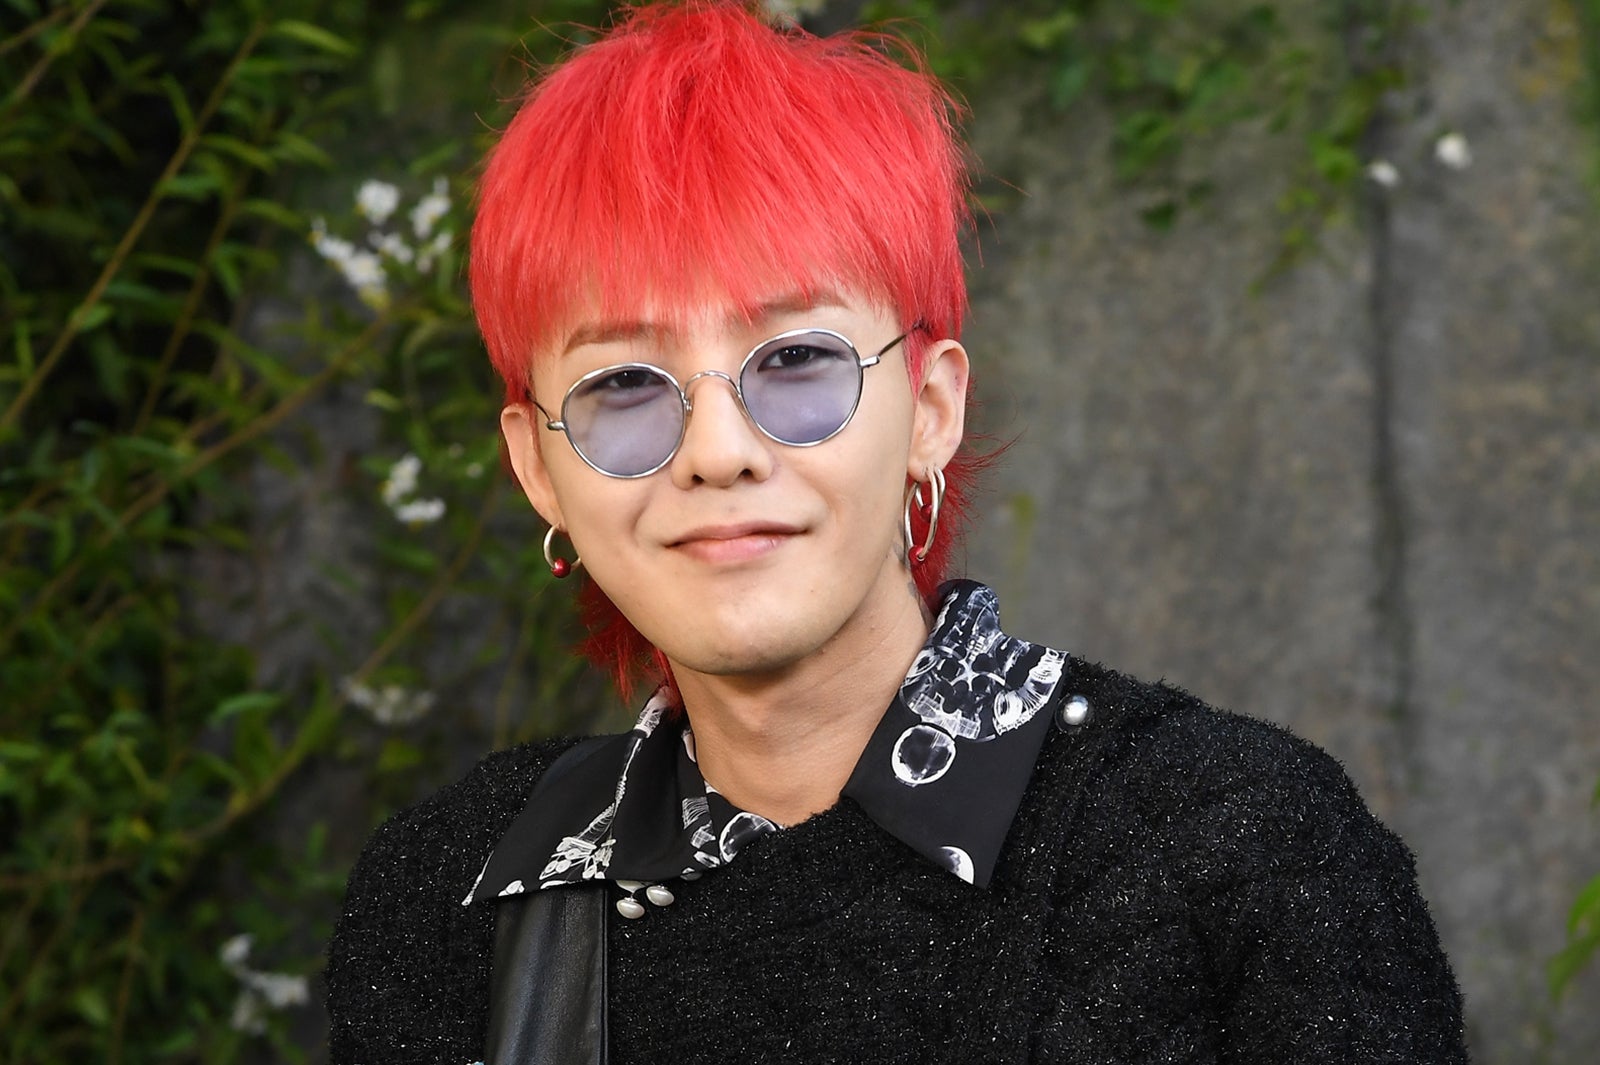 G-DRAGON／Photo by Getty Images